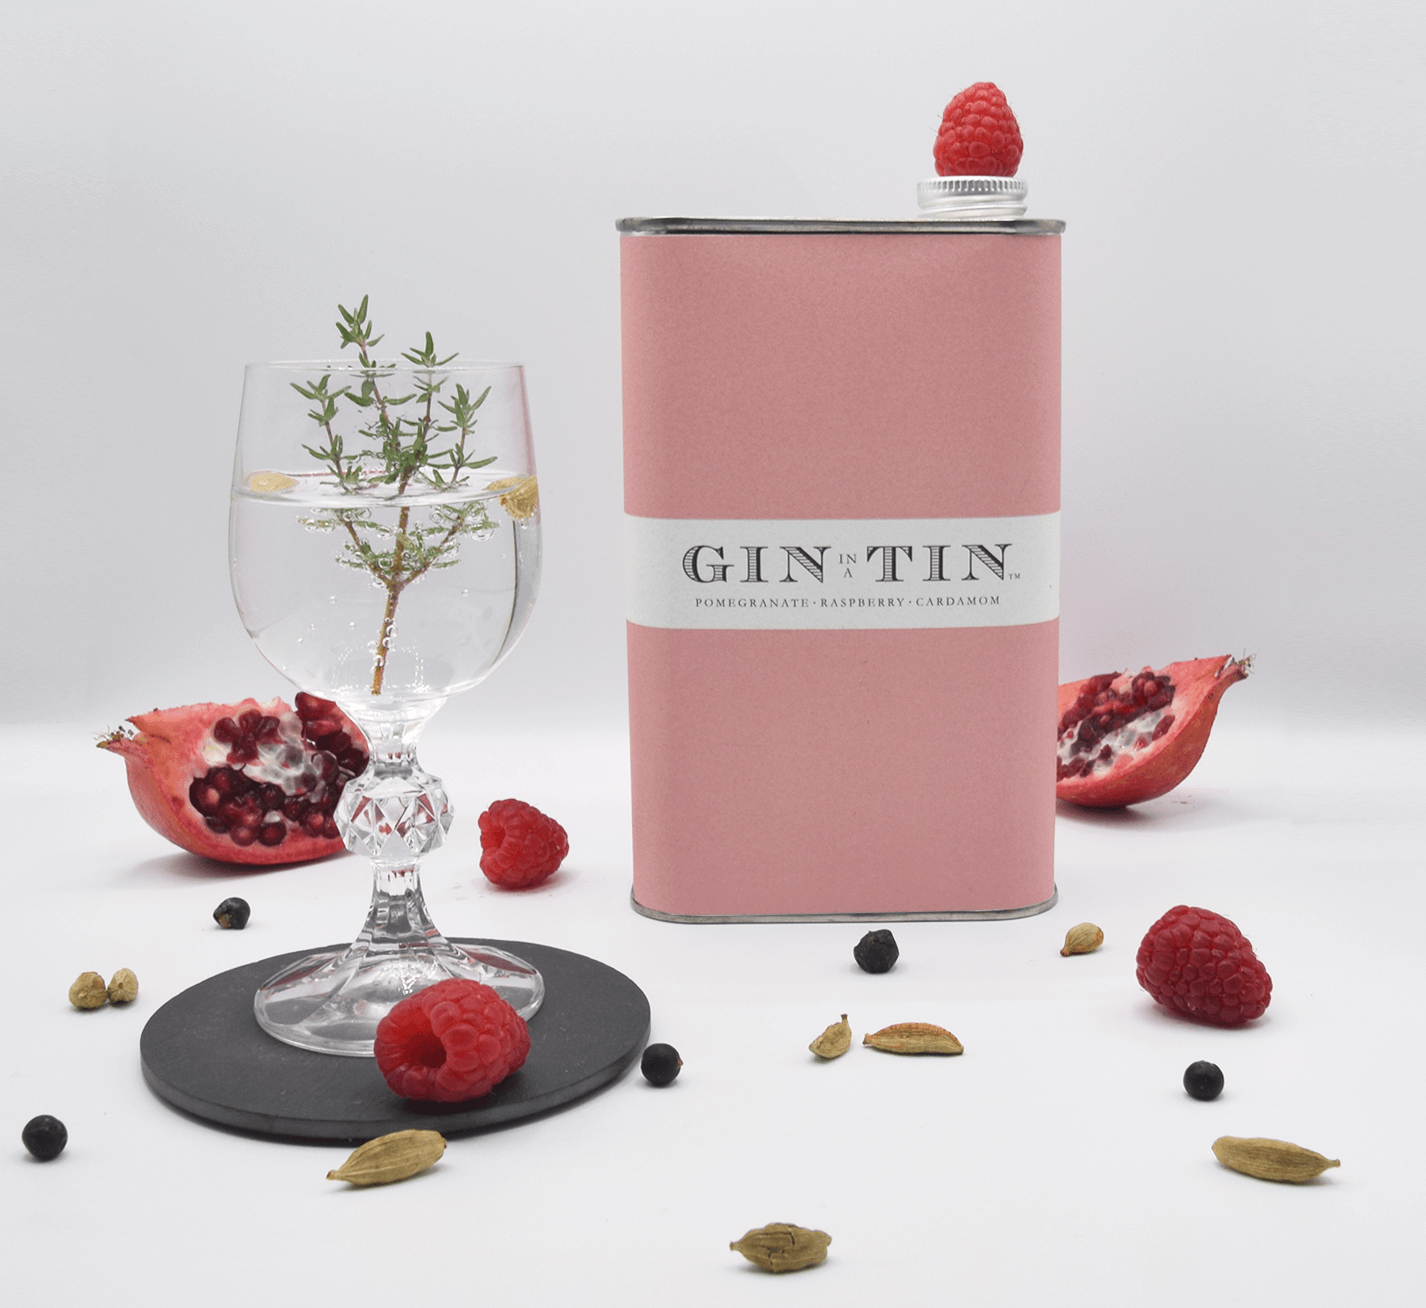 pomegranate, raspberry and cardamom gin in a pink tin